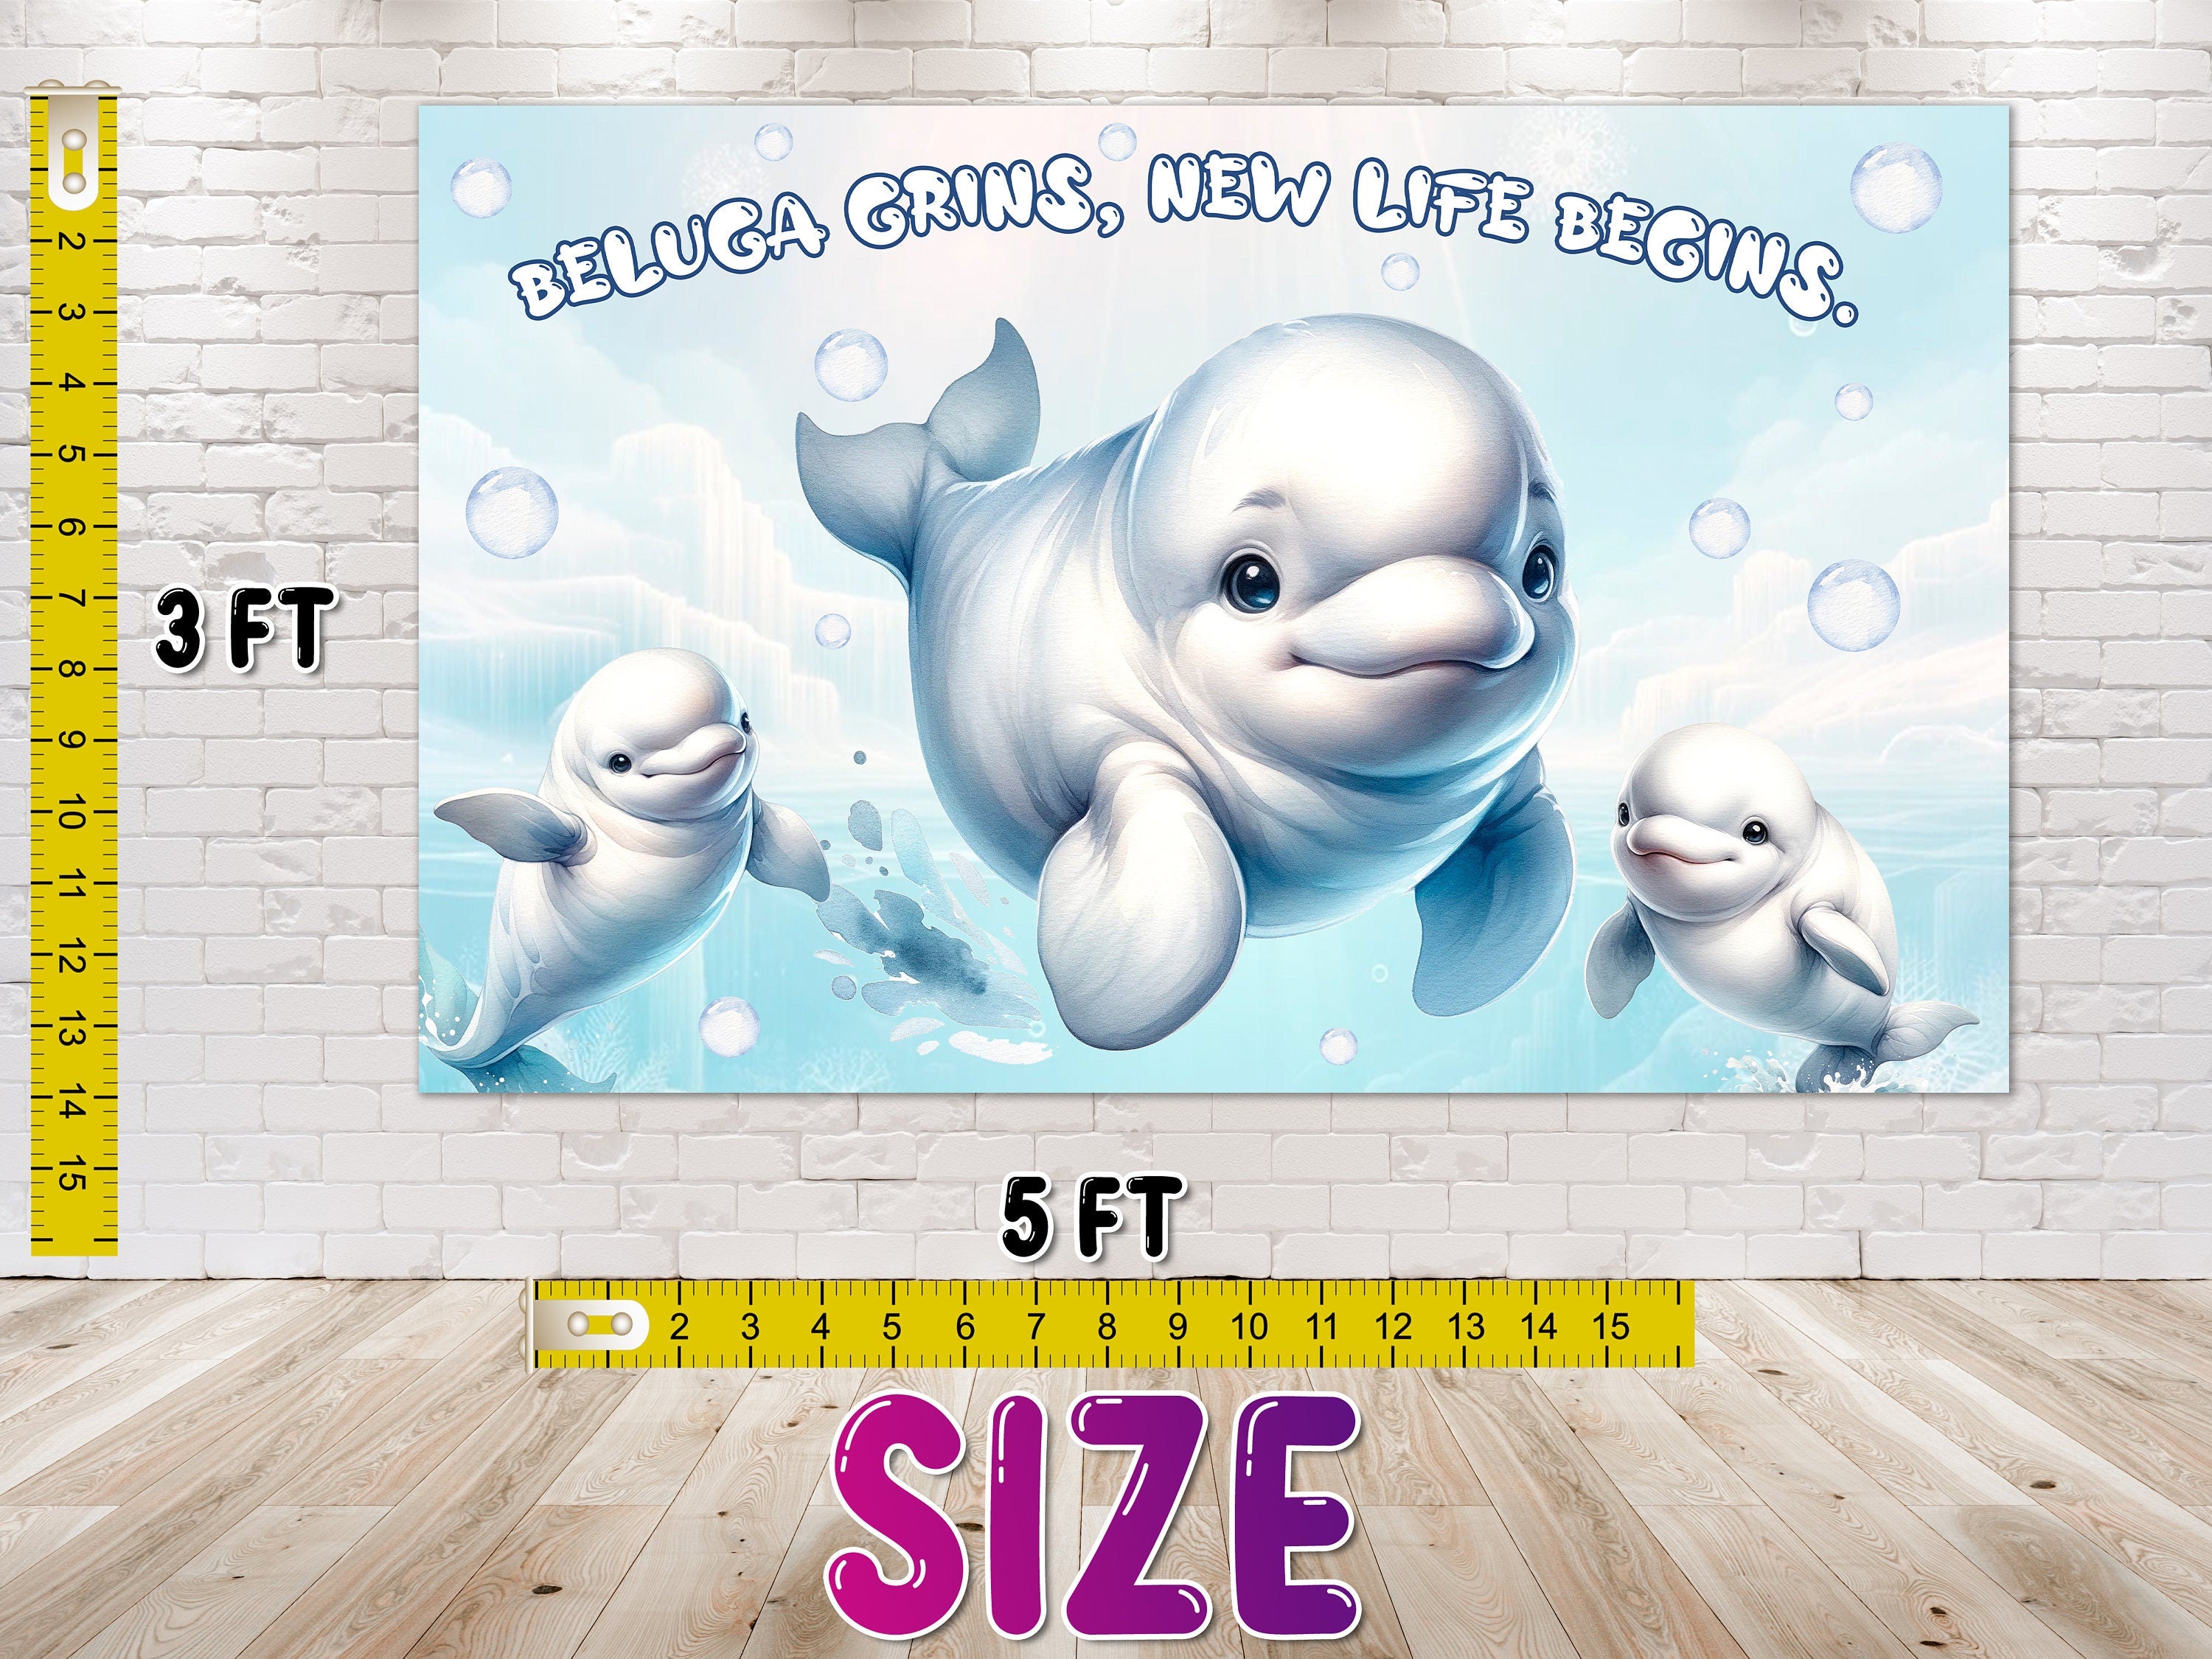 Adorable Beluga Baby Shower Backdrop 5x3 FT - Cute Ocean Theme Party Decorations